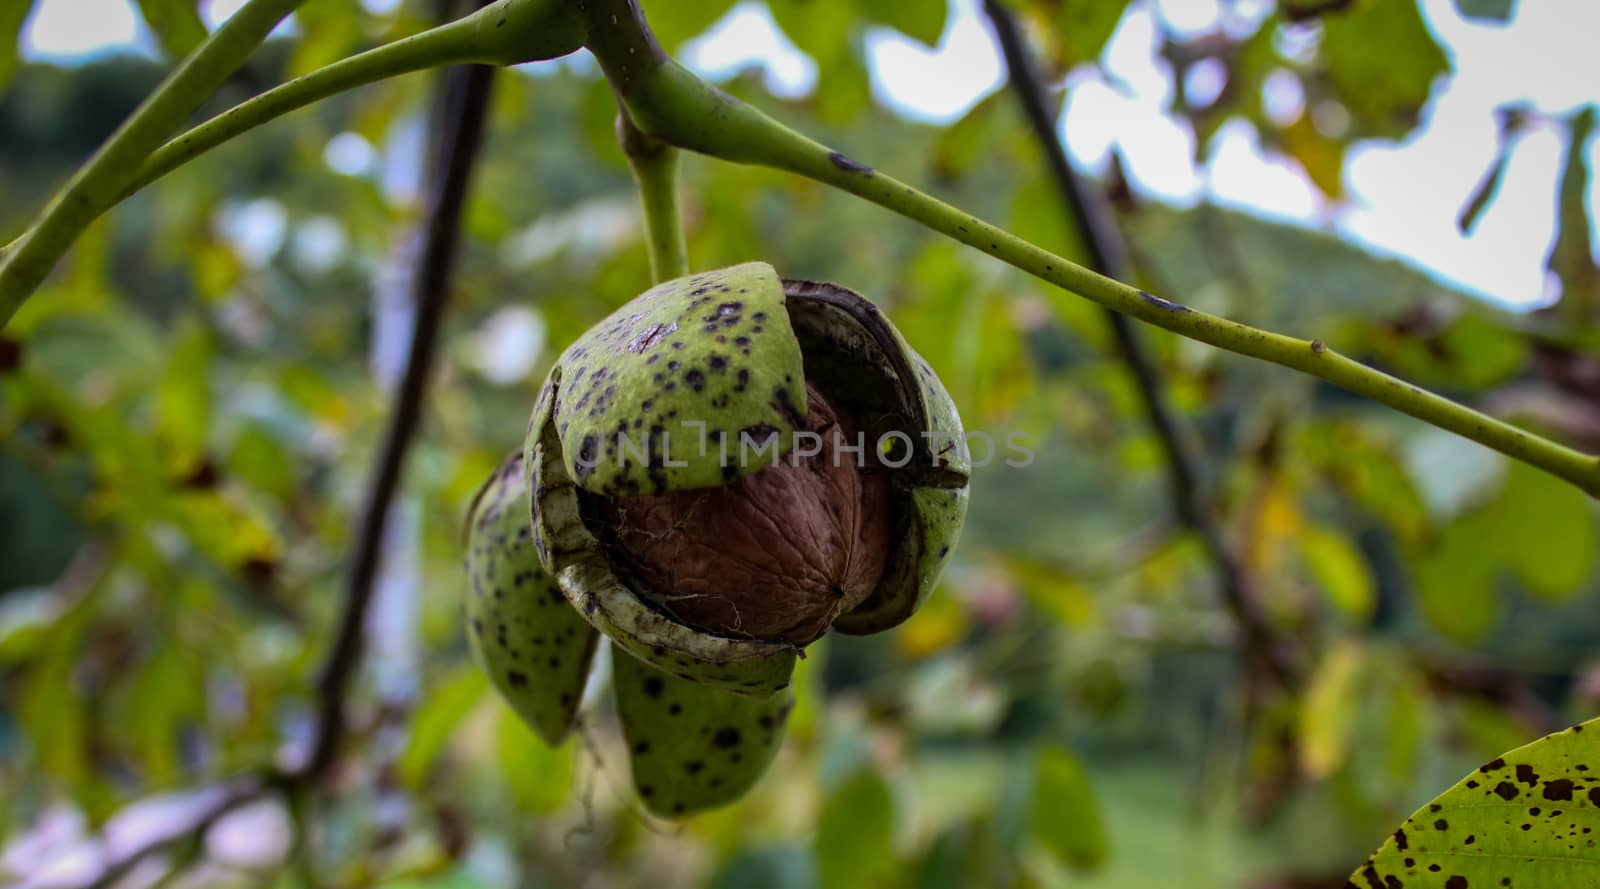 A cracked green shell from which a walnut can be seen. Walnut banner on the branches. Zavidovici, Bosnia and Herzegovina.